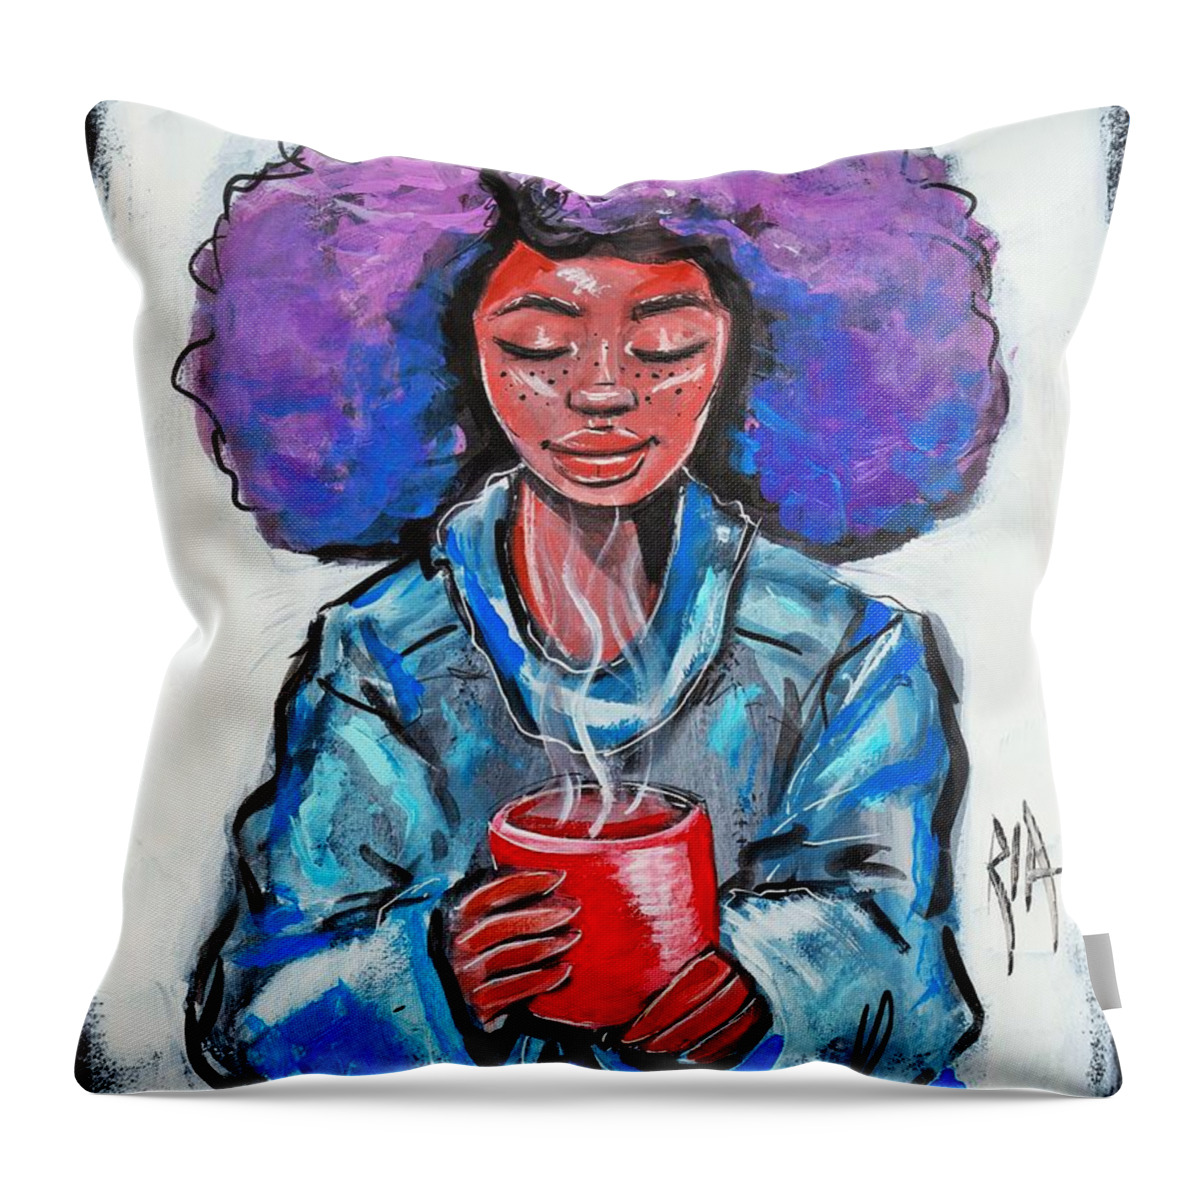 Coffee Throw Pillow featuring the painting Hot Cocoa by Artist RiA